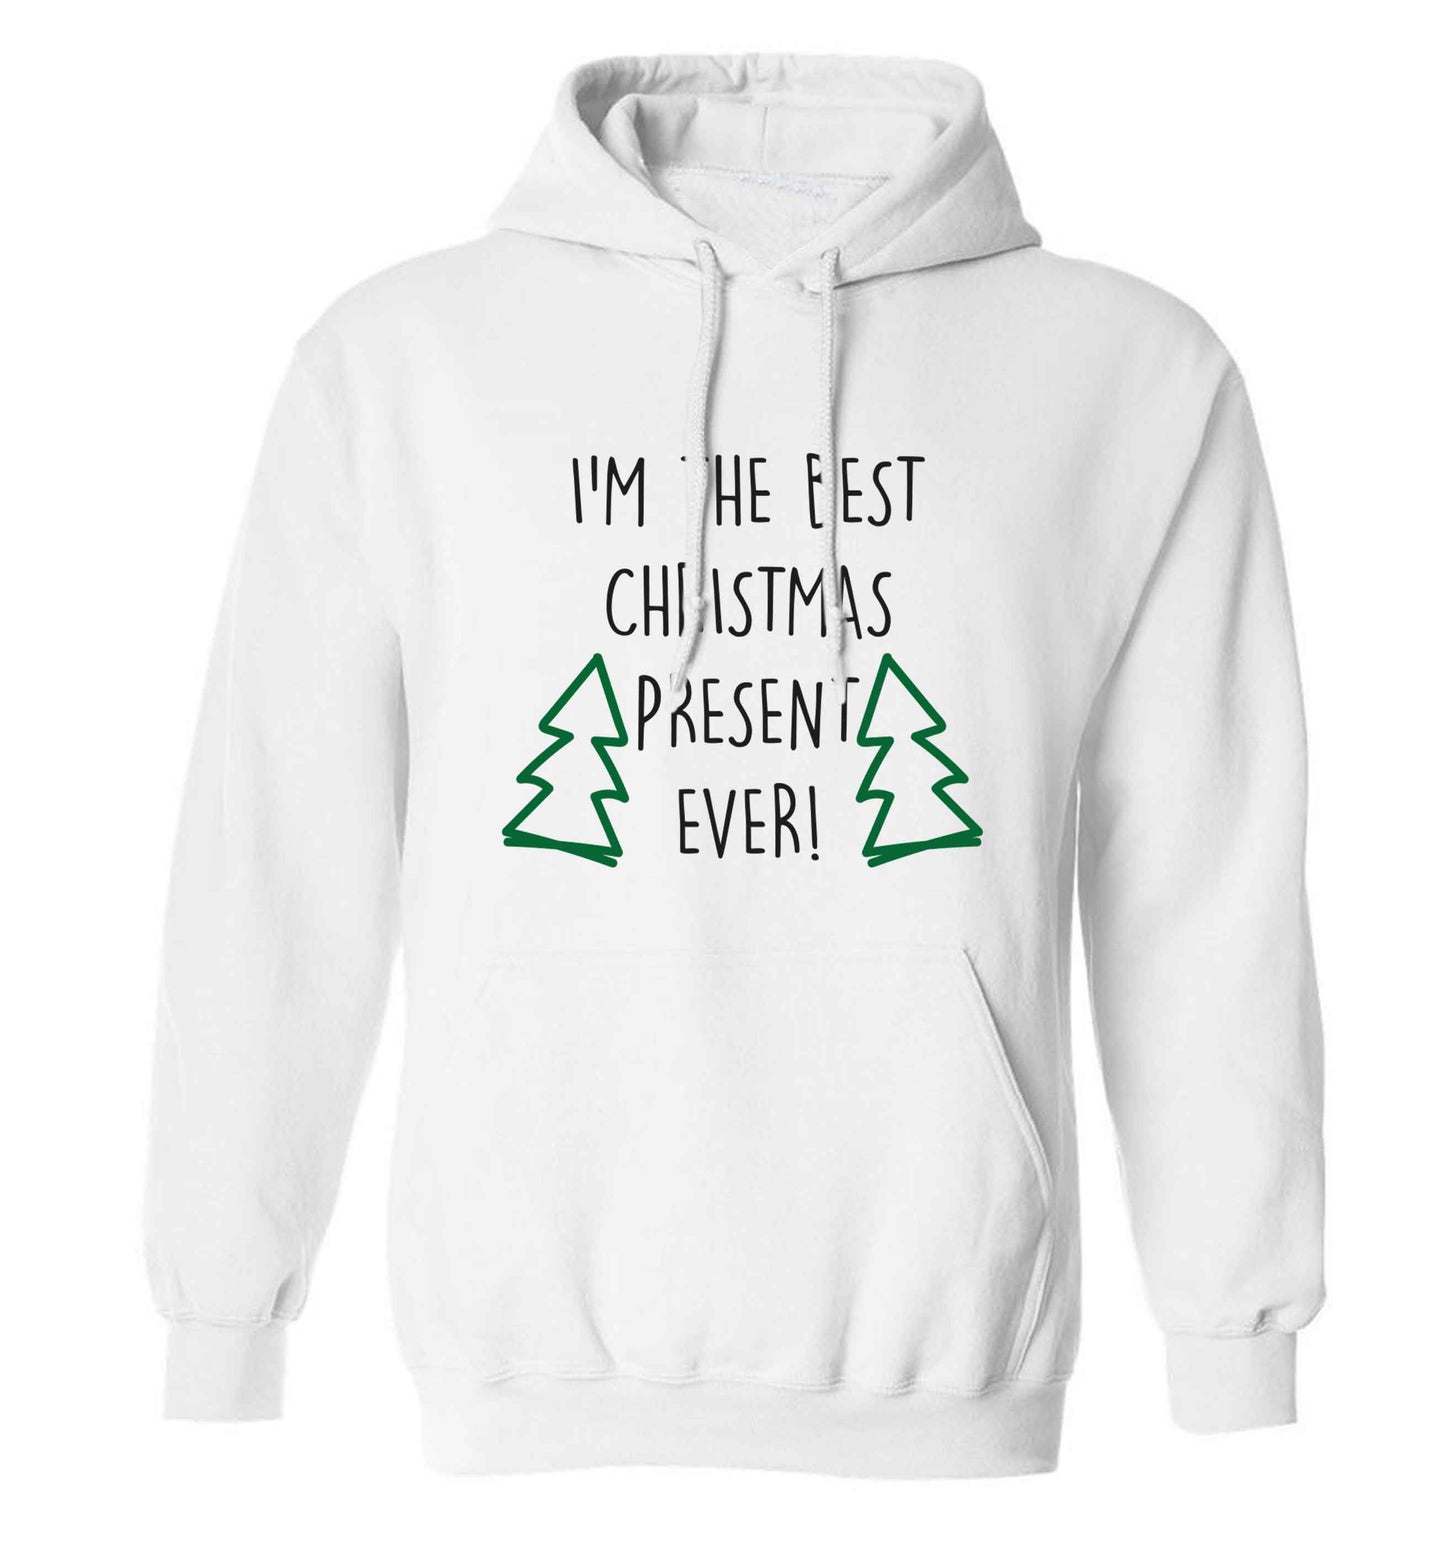 I'm the best Christmas present ever adults unisex white hoodie 2XL